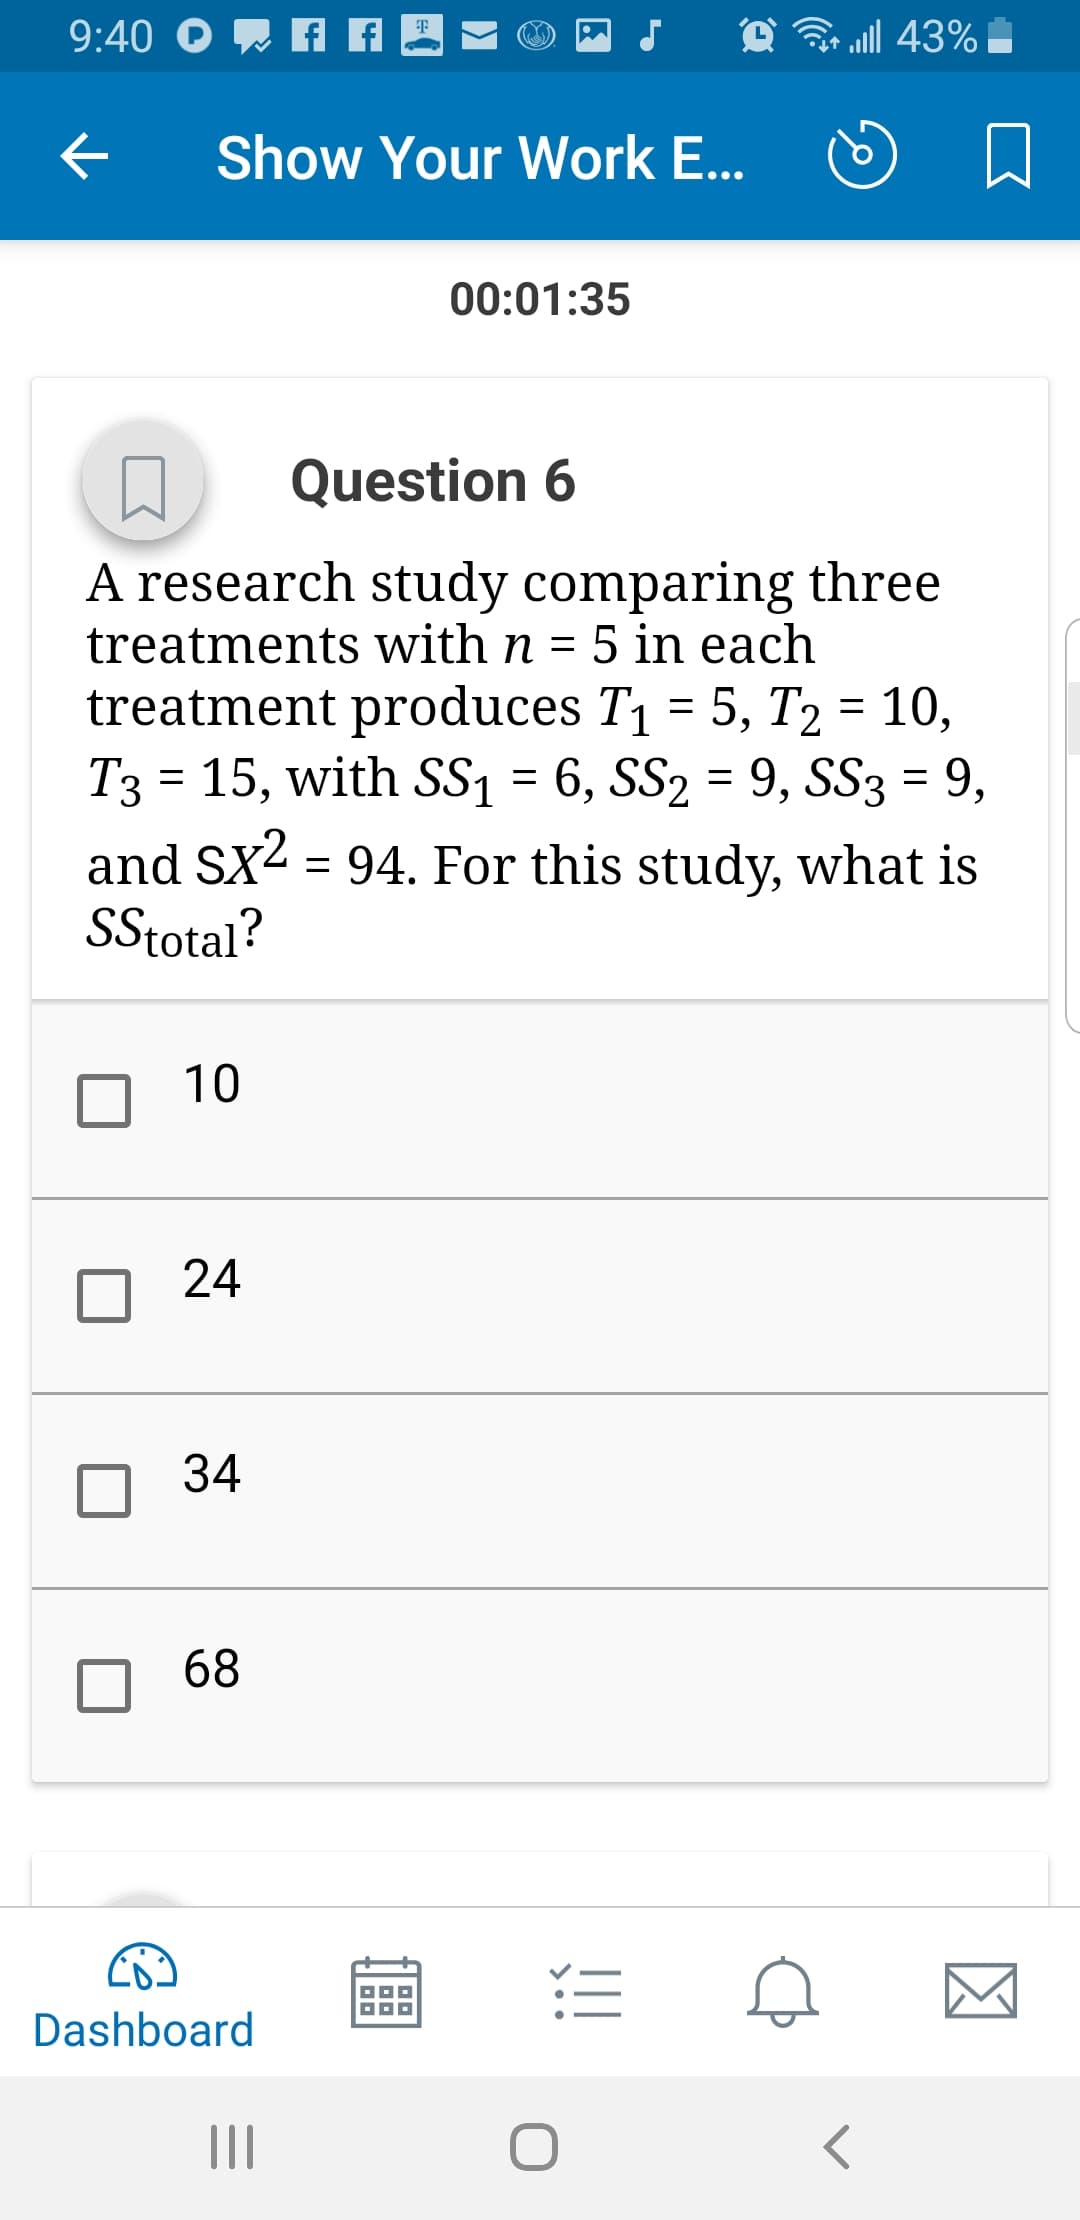 Show Your work E
口
00:01:35
Question 6
A research study comparing three
treatments with n -5 in each
treatment produces T1-5, T2-10,
T3 - 15, with SS1 - 6, SS2 - 9, SS3 - 9,
and SX2-94. For this study, what is
SStotal
10
□ 24
34
68
Dashboard
